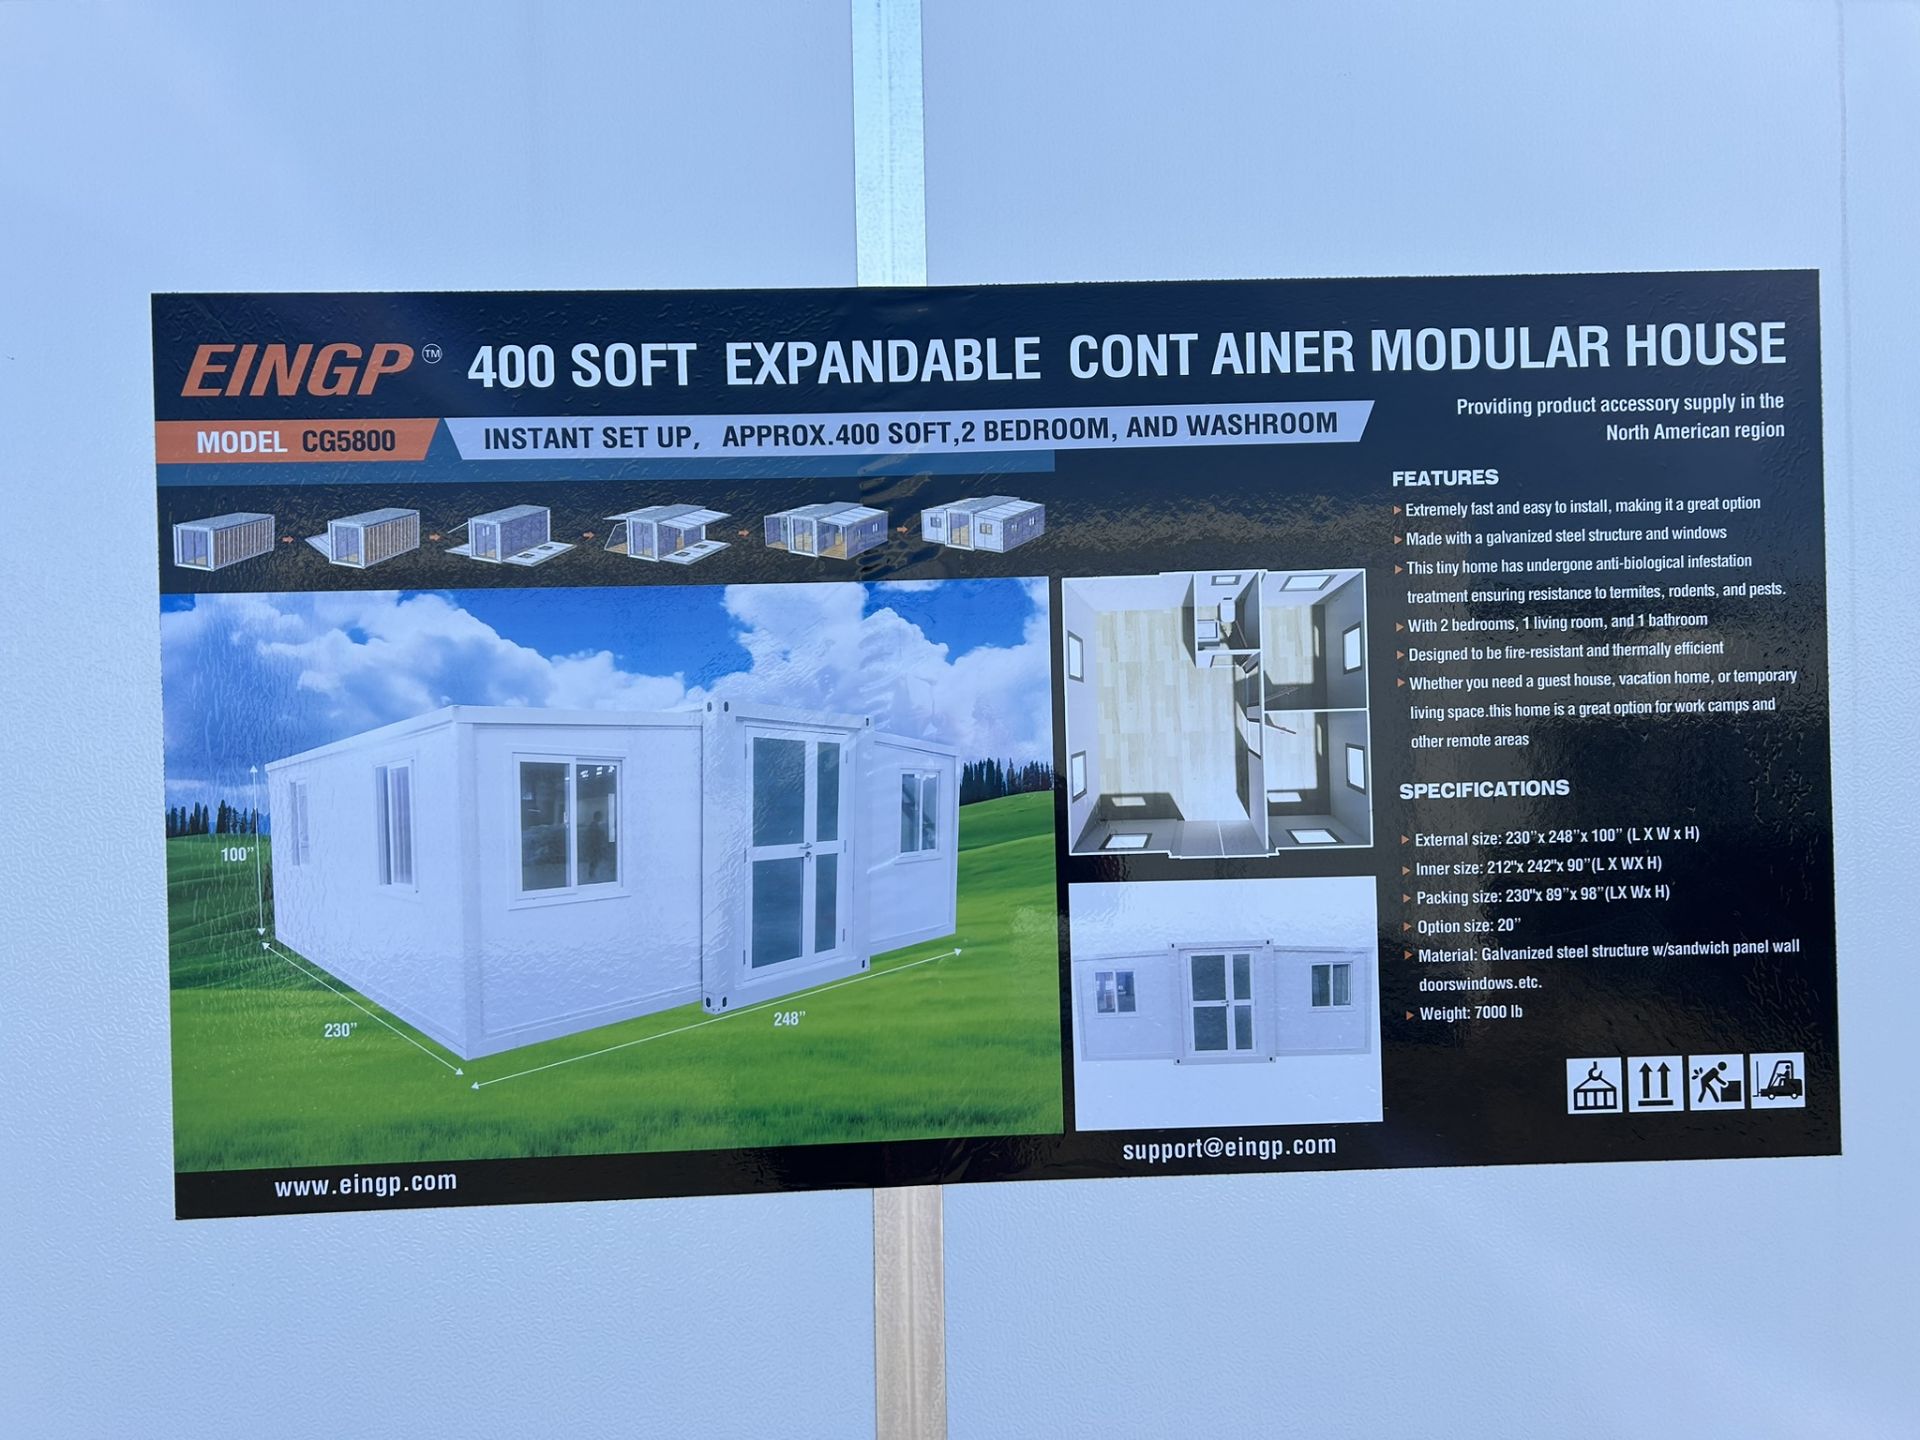 EINGP CG5800 400 SQFT EXPANDABLE CONTAINER MODULAR HOUSE, APPROX 400 SQFT. , 2-BEDROOM W/ WASHROOM - Image 6 of 12